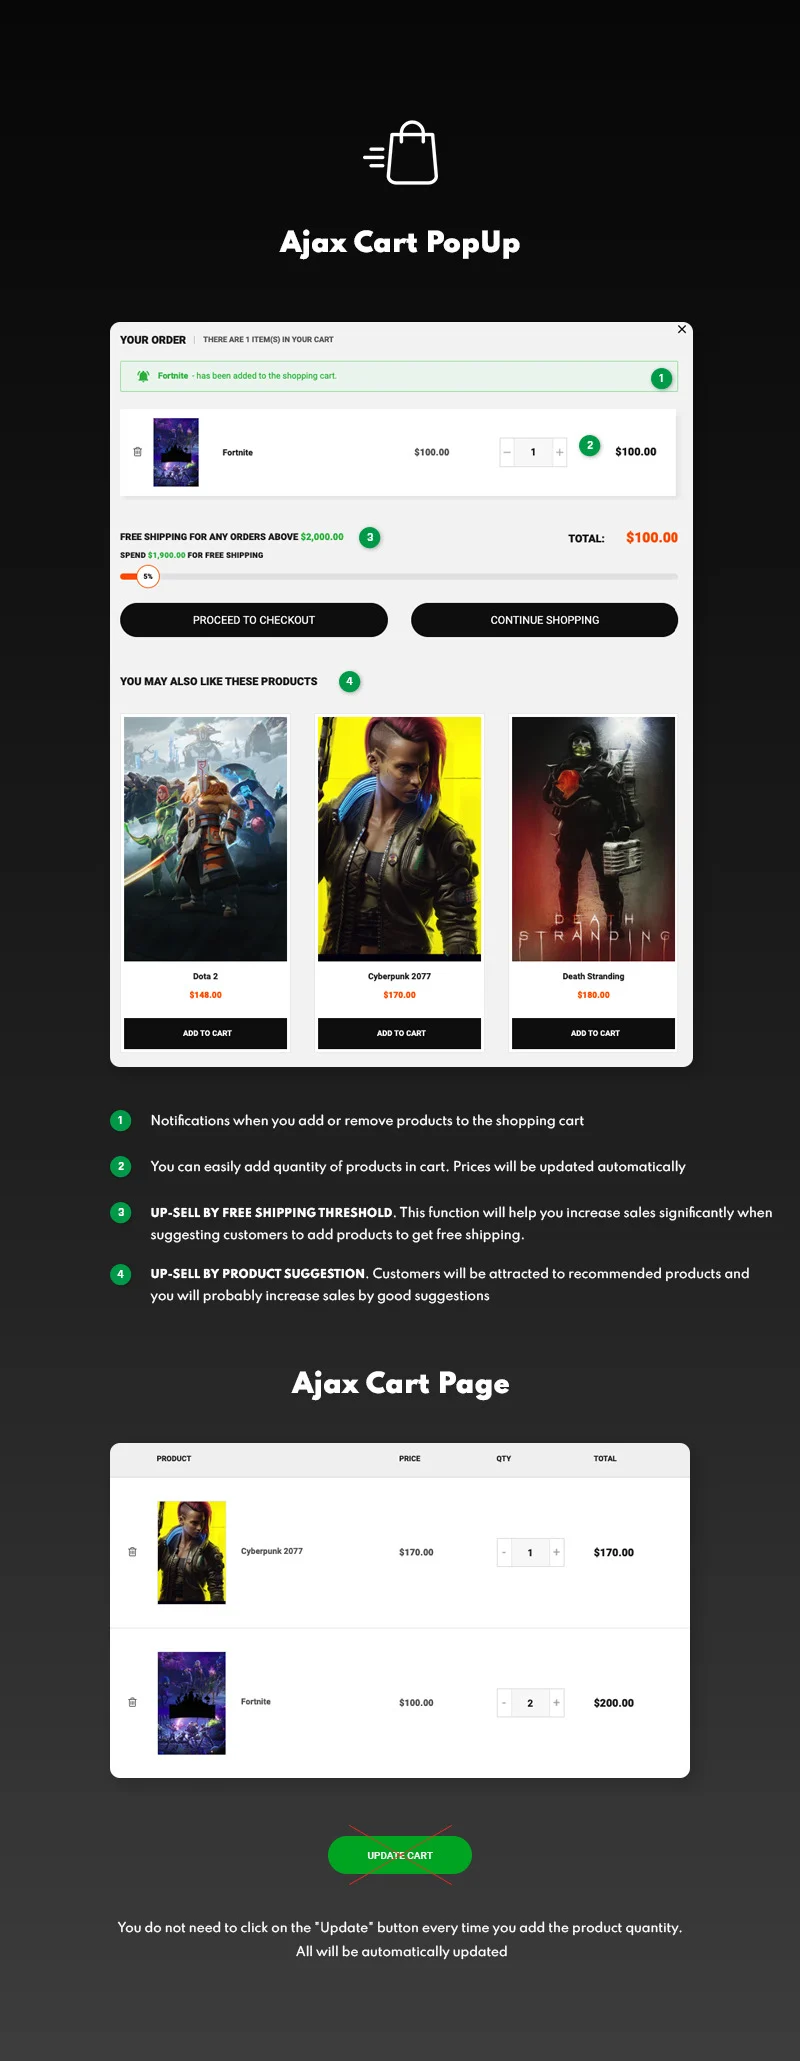 White lettering "Ajax Cart PopUp" and 2 pages in web versions on a black background.